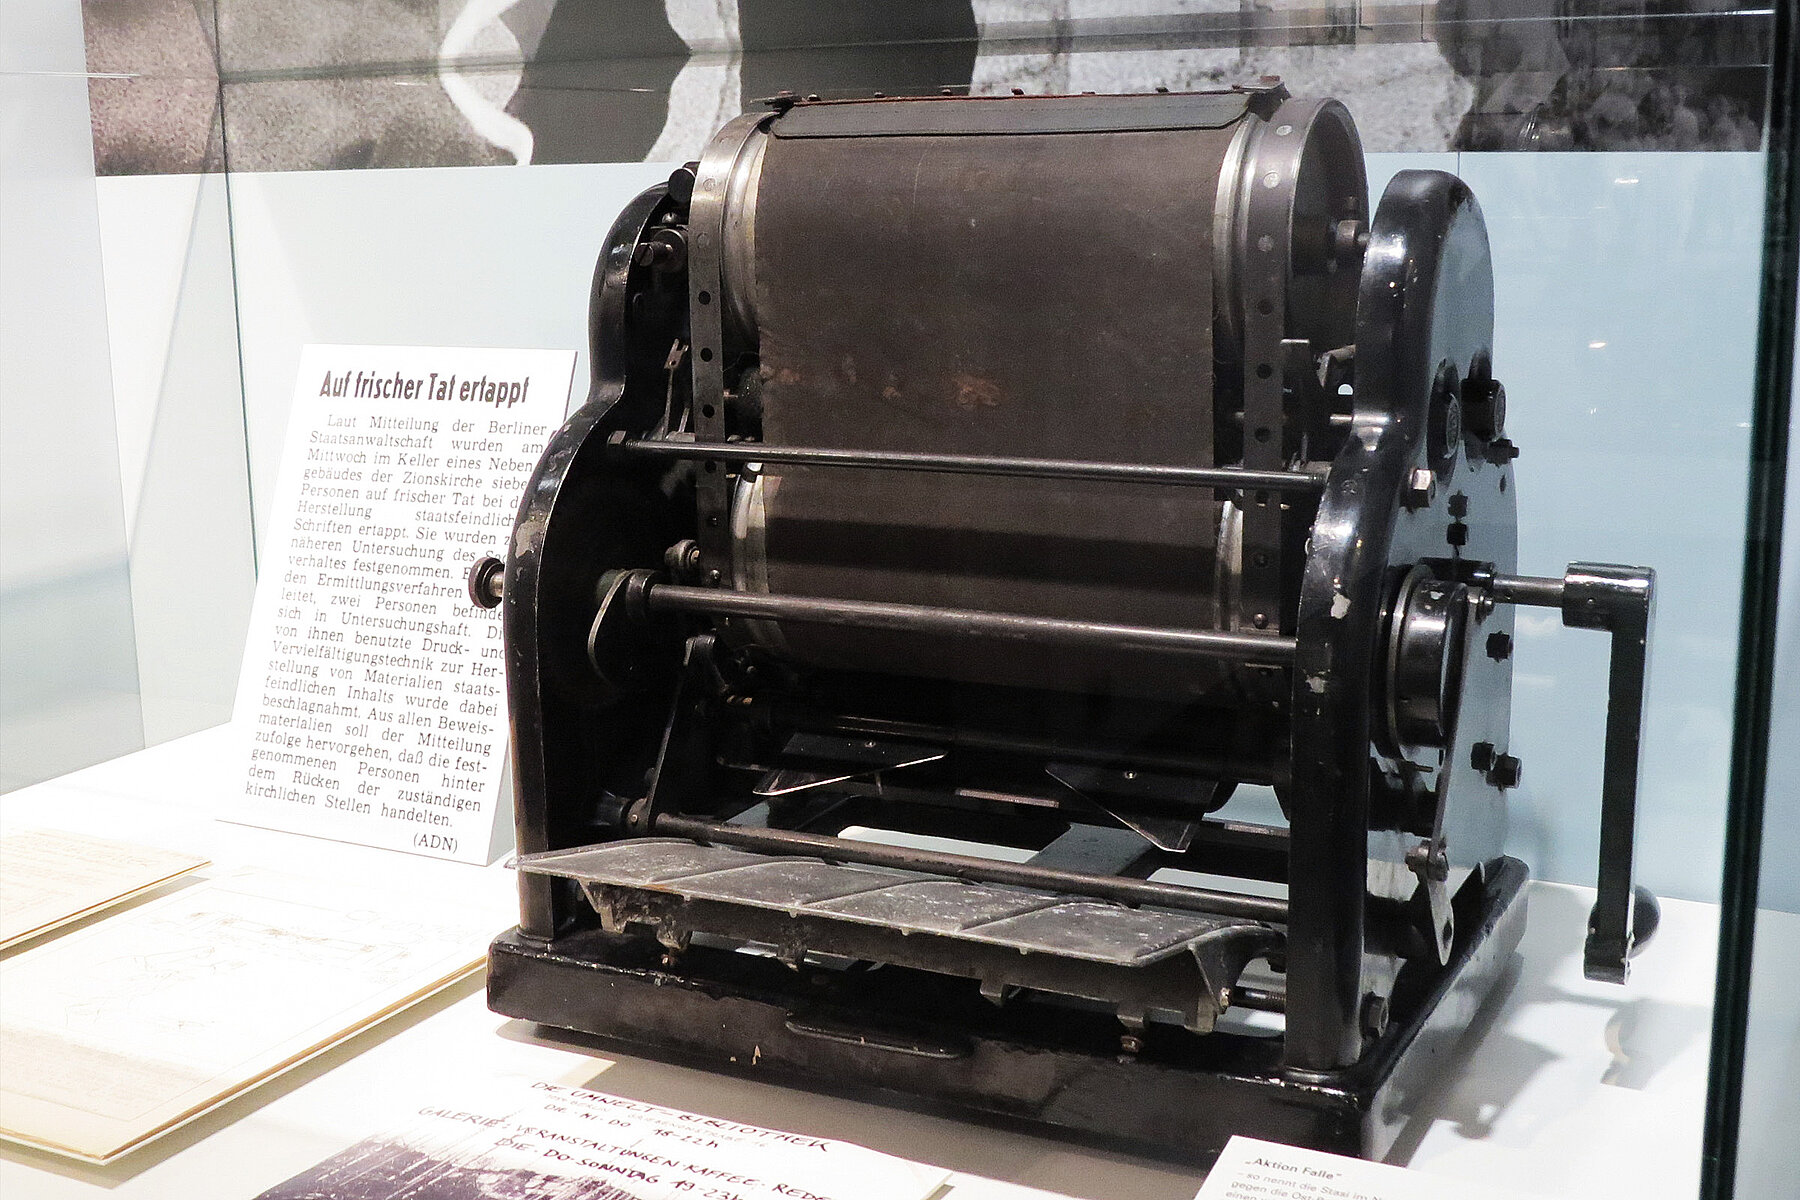 A black duplicator from the 1930s.